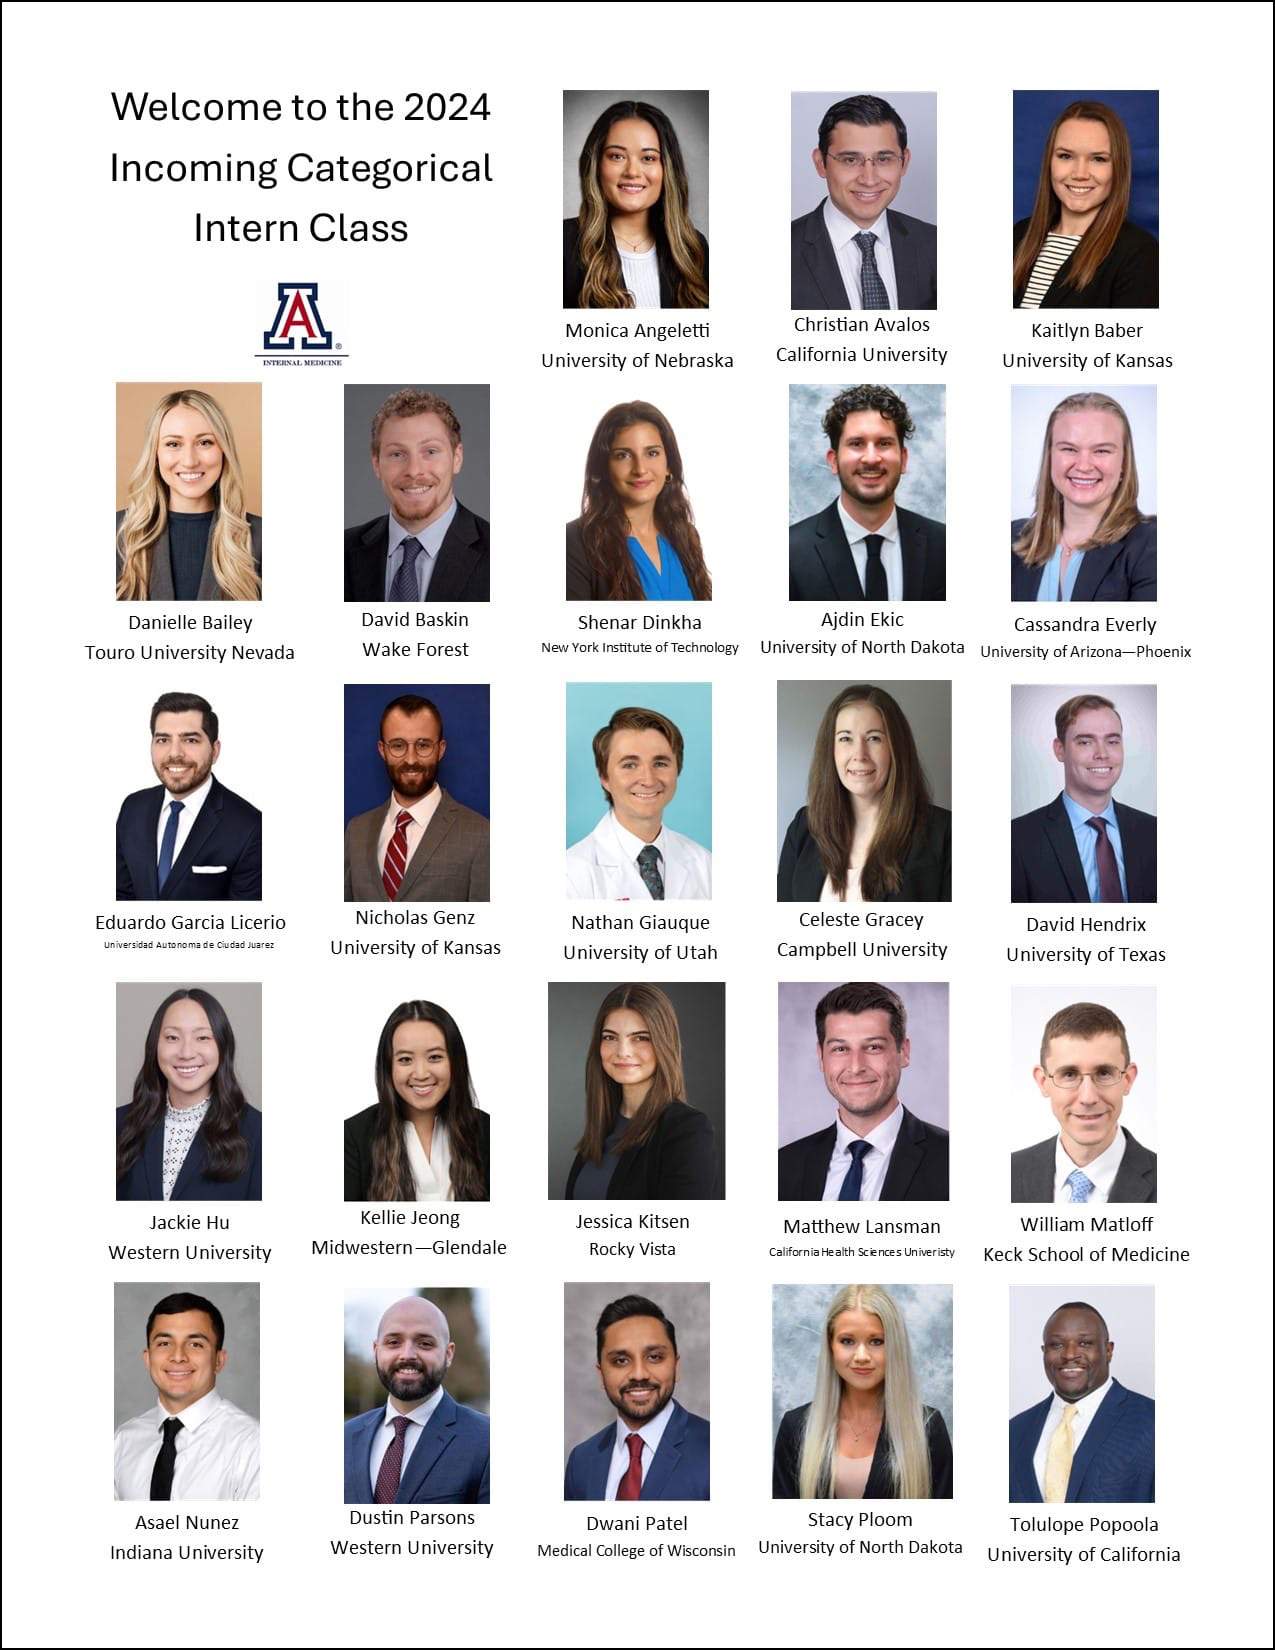 [First page of photos of incoming 2024-25 intern class for Internal Medicine Residency Program - Tucson Campus]]